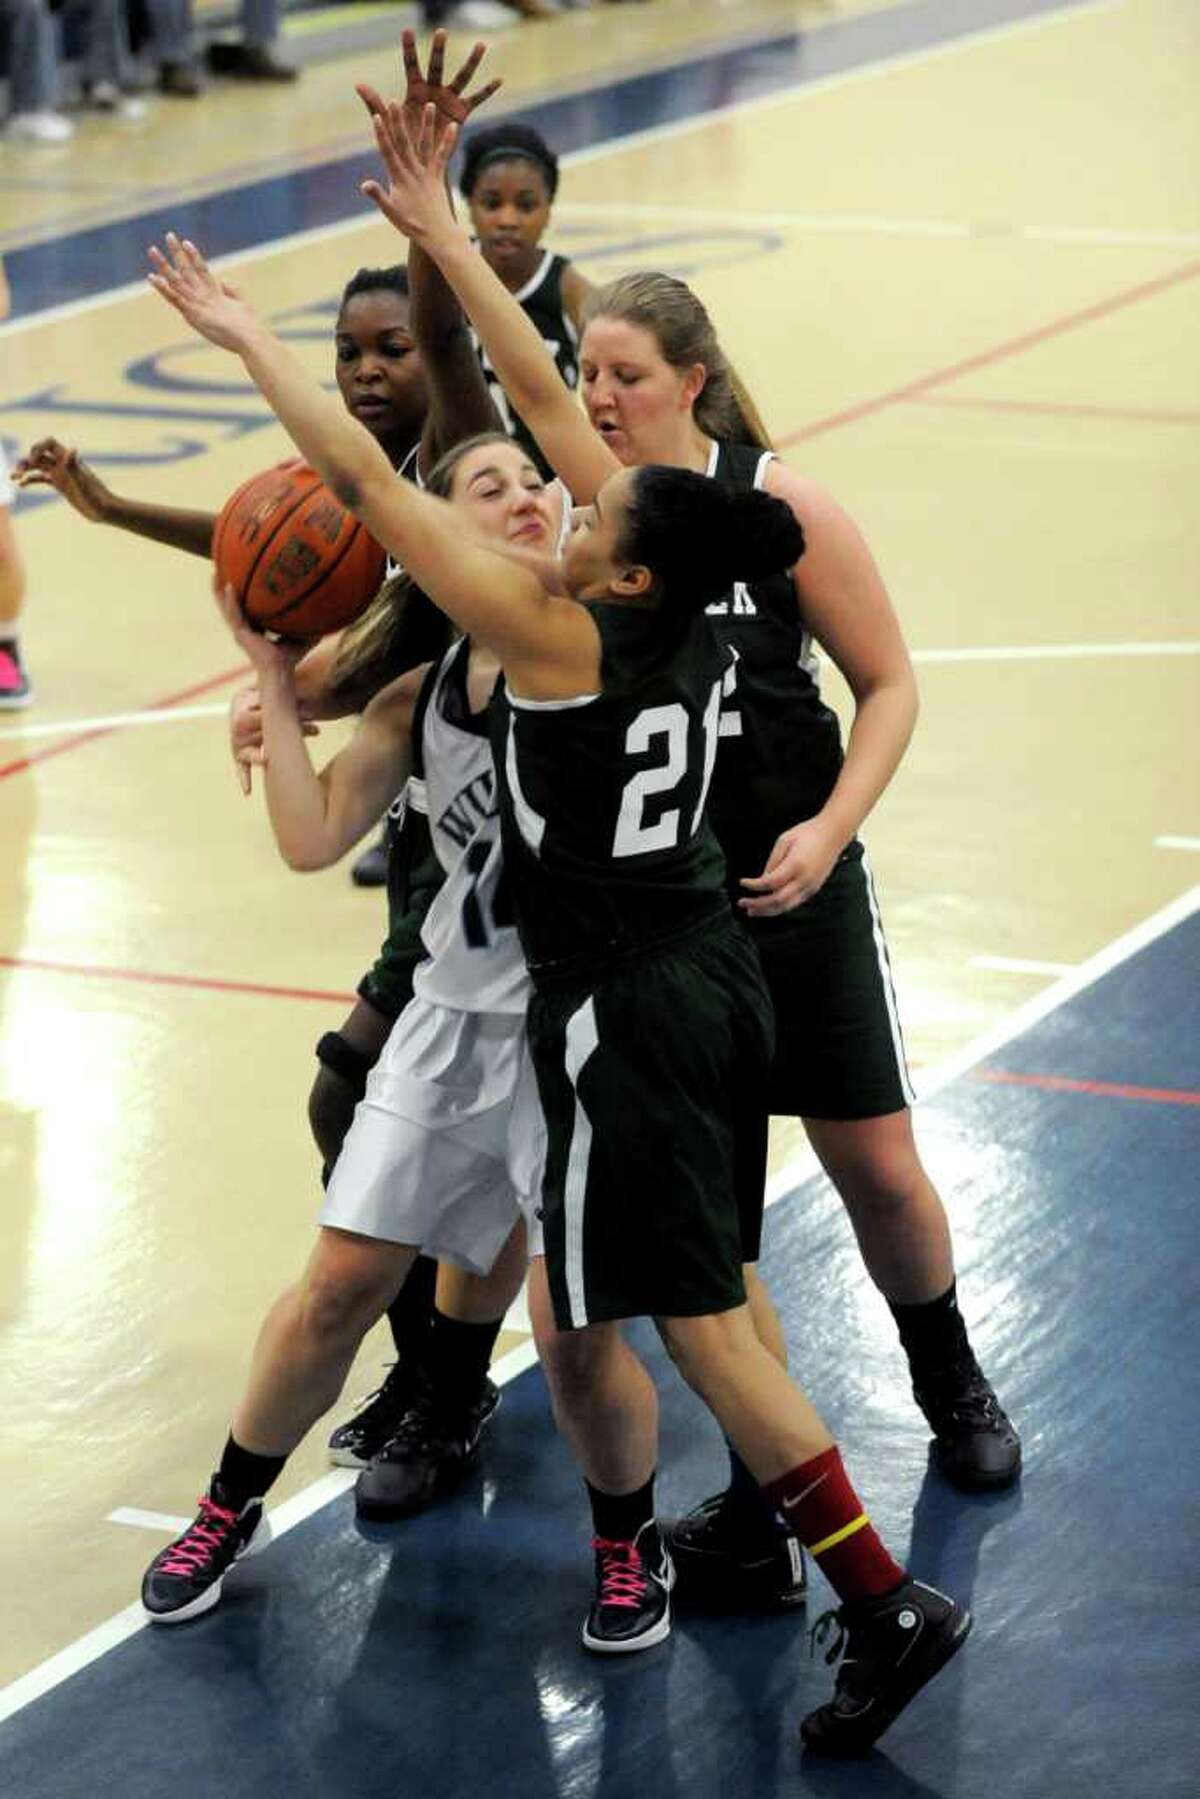 Wilton's Alyssa Malvarossa is surrounded by Norwalk players during Saturday's FCIAC Girls Basketball quarterfinal game at Wilton High School on February 18, 2012.